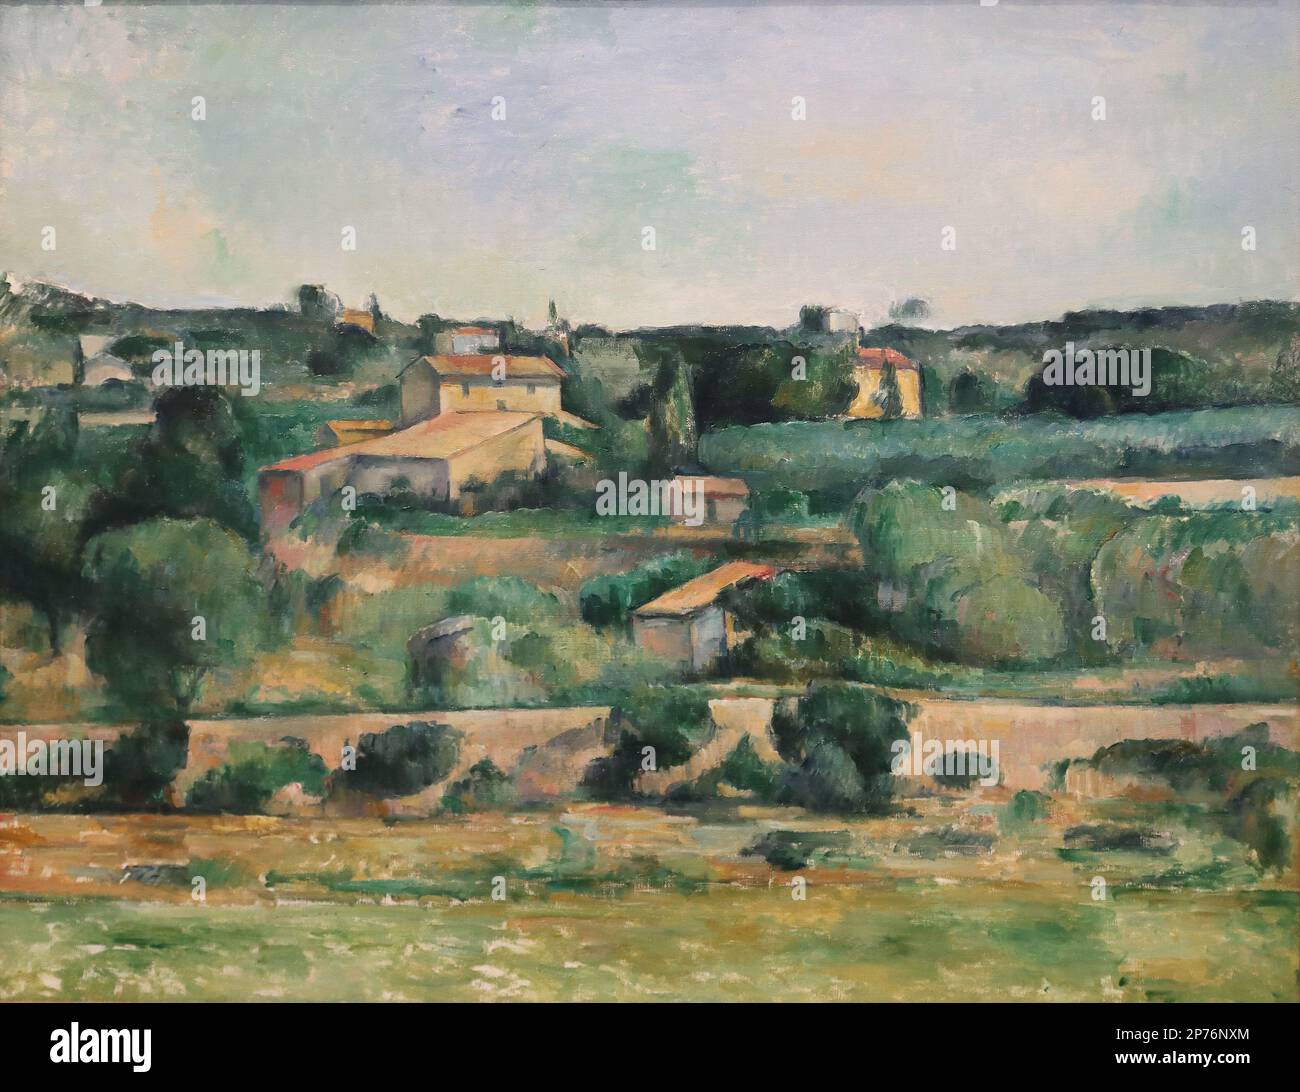 Landschaft im Westen von Aix-en-Provence (Landscape in the west of Aix-en-Provence) by French Impressionist painter Paul Cezanne at the Wallraf-Richartz Museum, Cologne, Germany Stock Photo